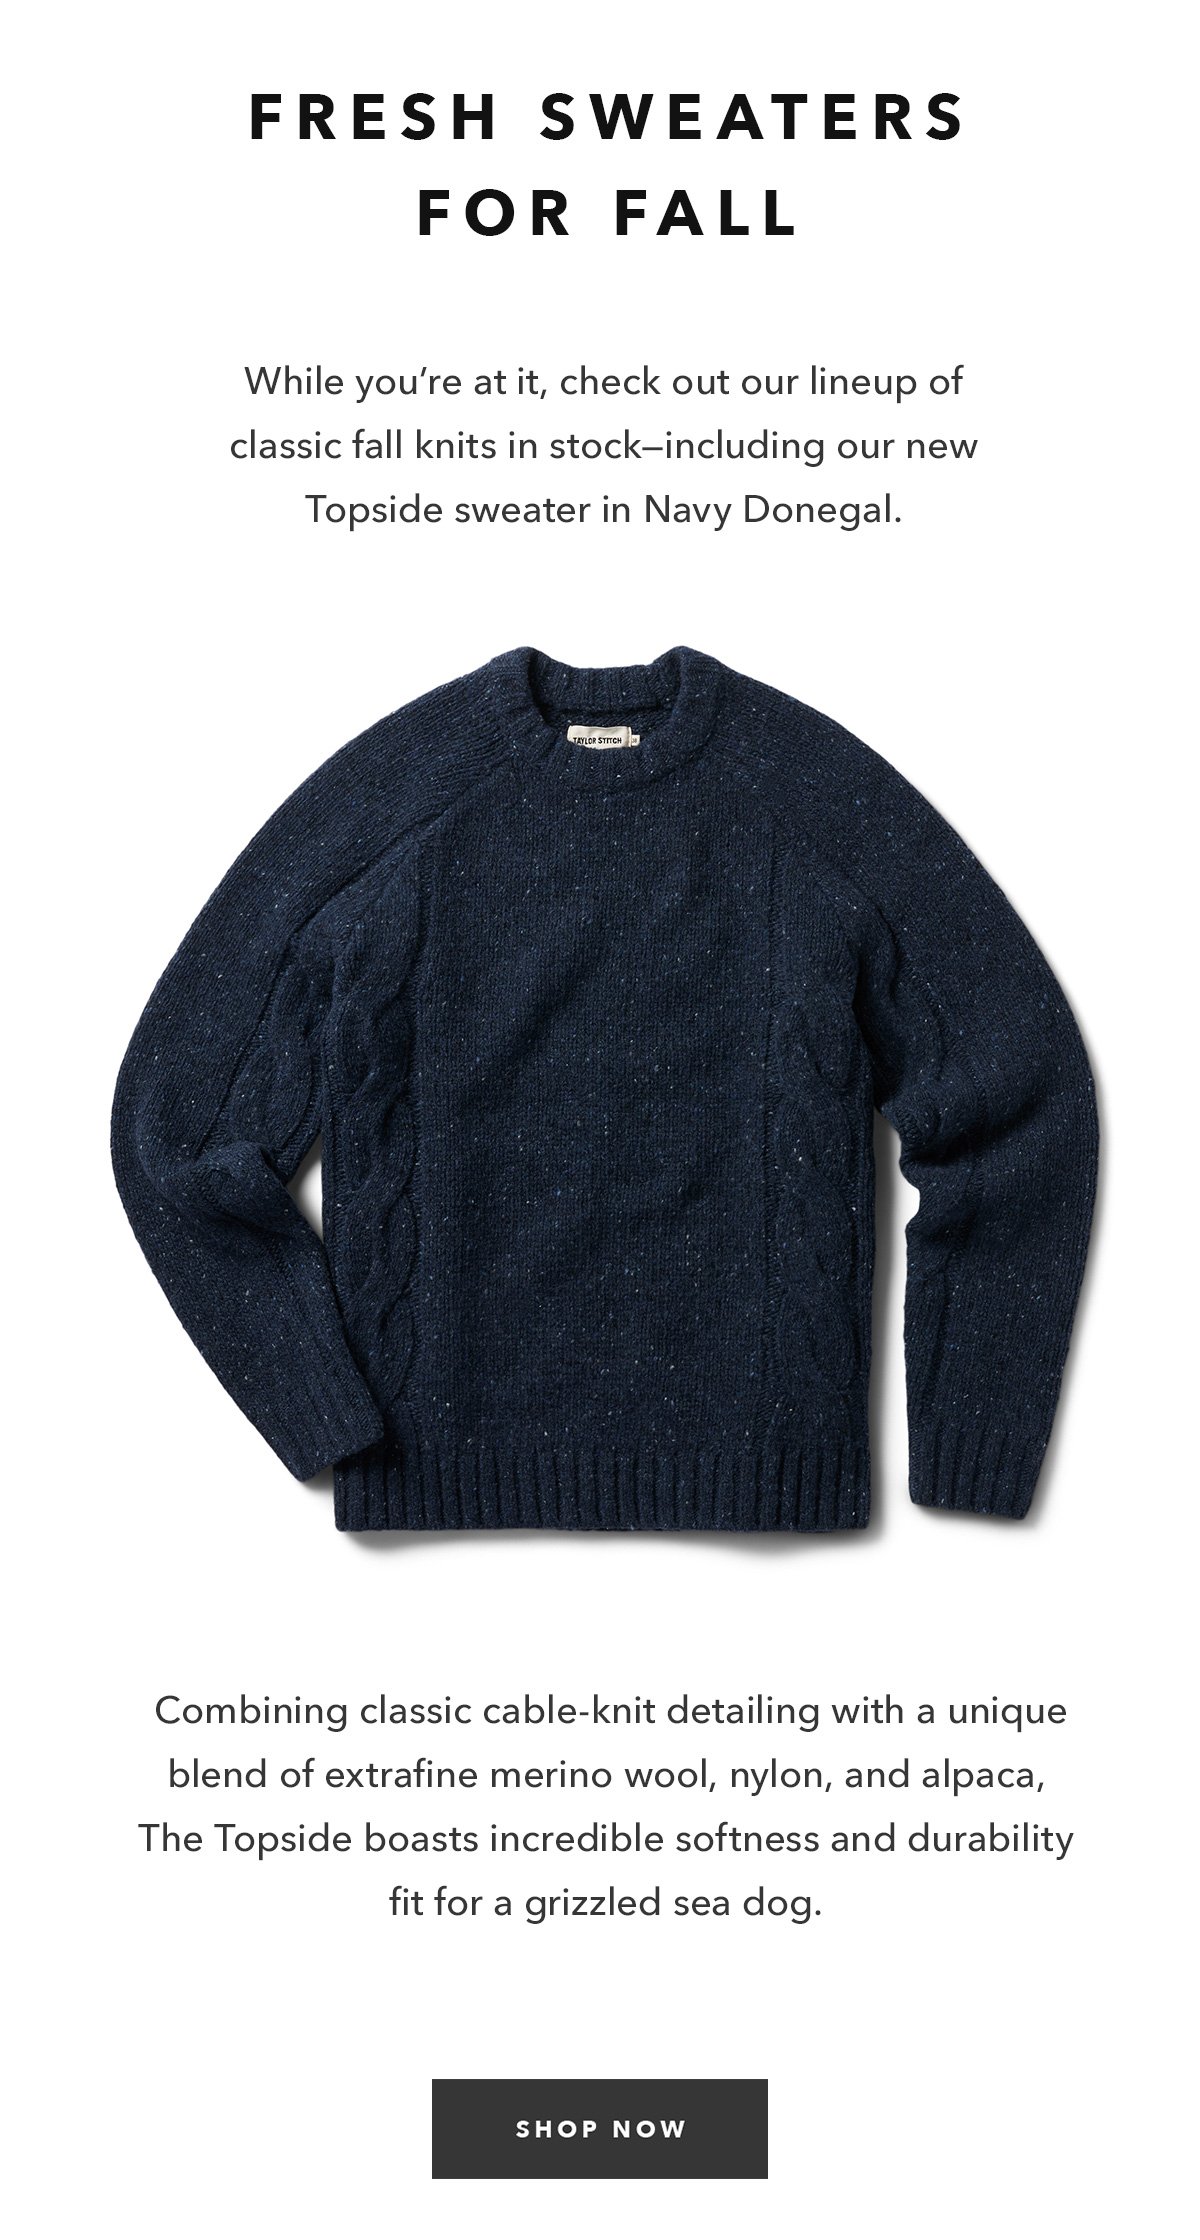 Fresh Sweaters for Fall: While you're at it, check out our lineup of classic fall knits in stock--including our new Topside sweater in Navy Donegal.